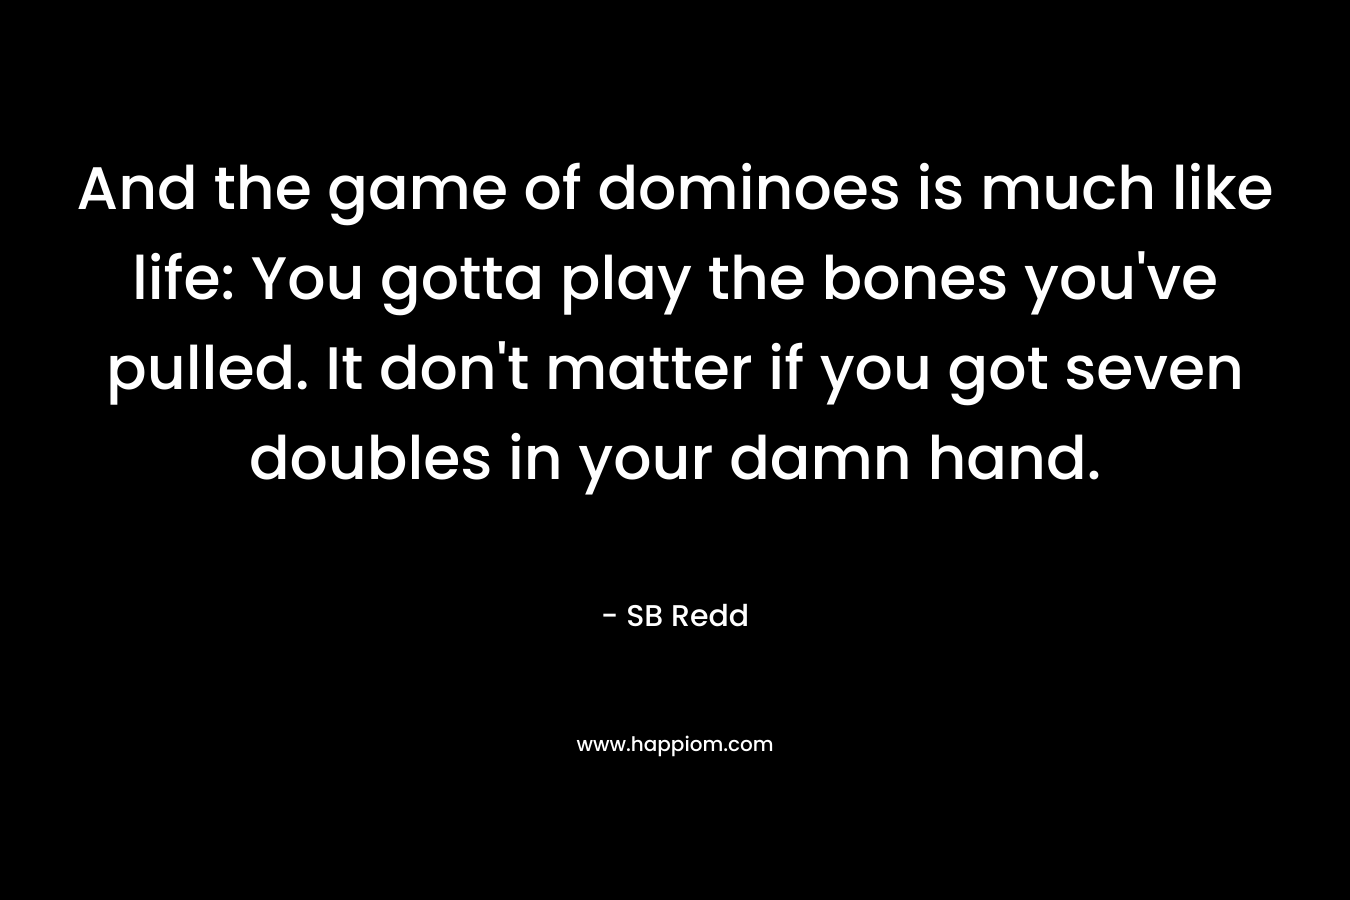 And the game of dominoes is much like life: You gotta play the bones you’ve pulled. It don’t matter if you got seven doubles in your damn hand. – SB Redd